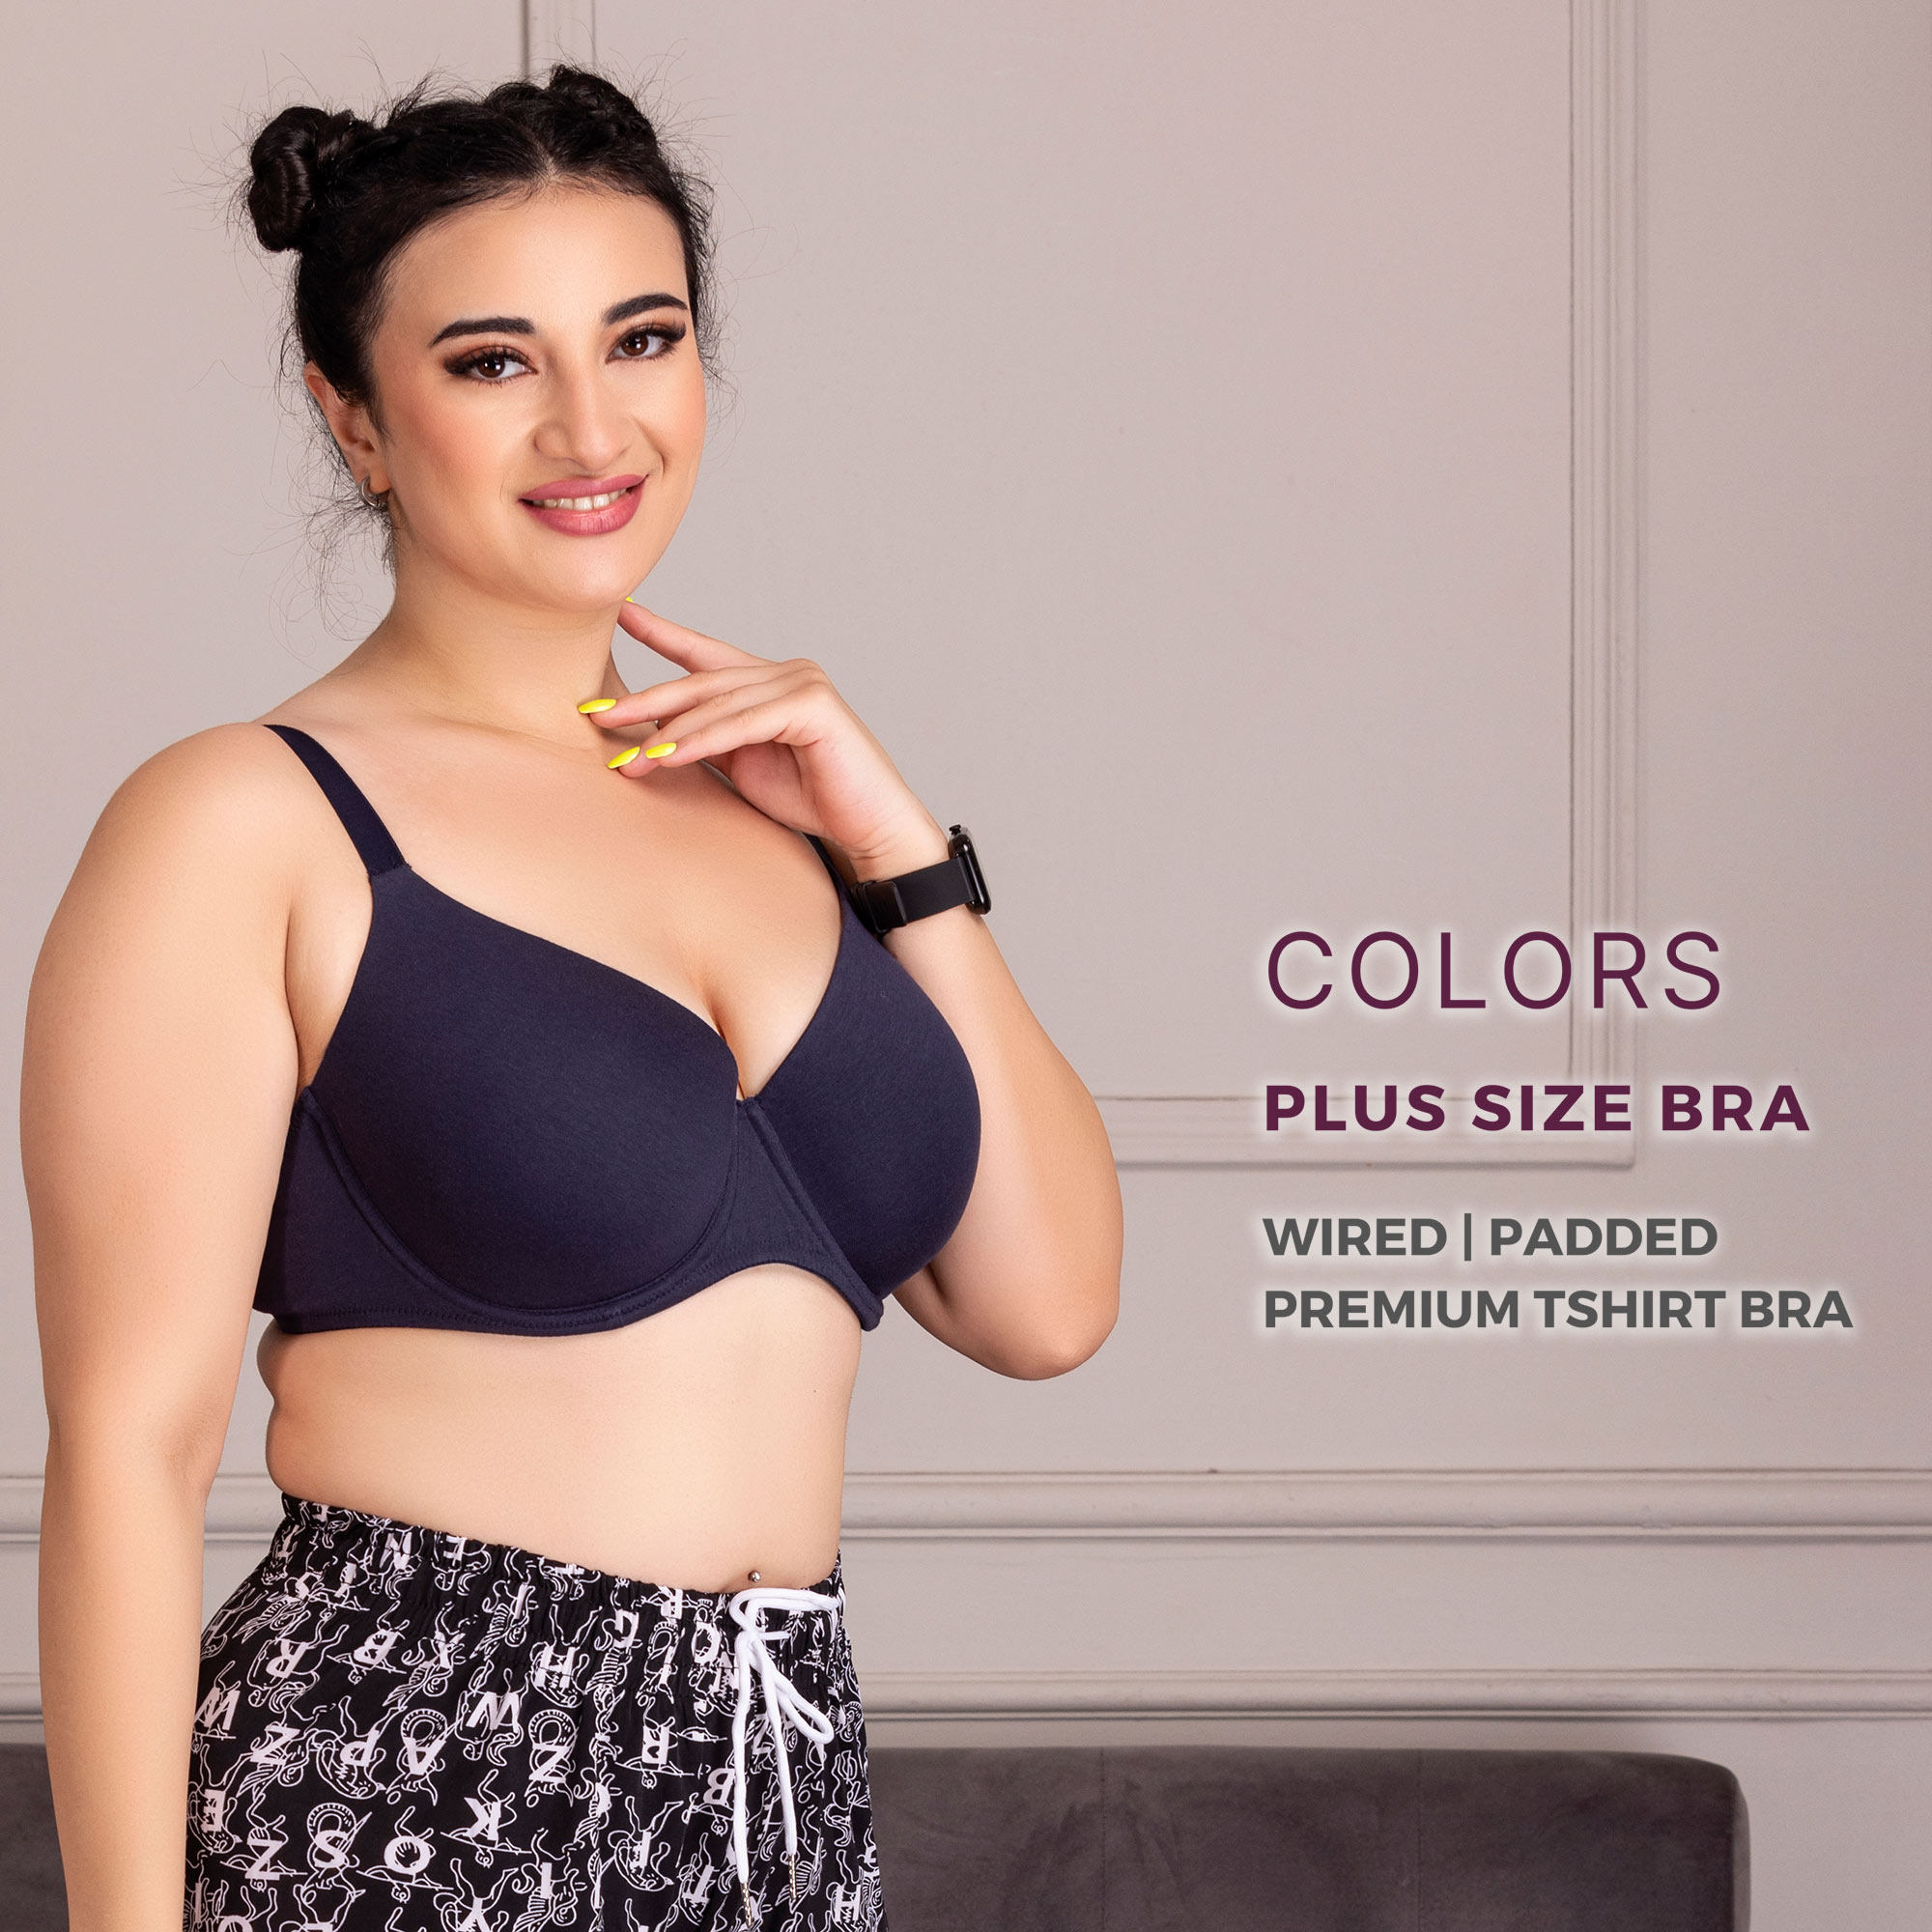 Navy Soft Touch Cotton T-shirt Dd+ Cup Size Bra